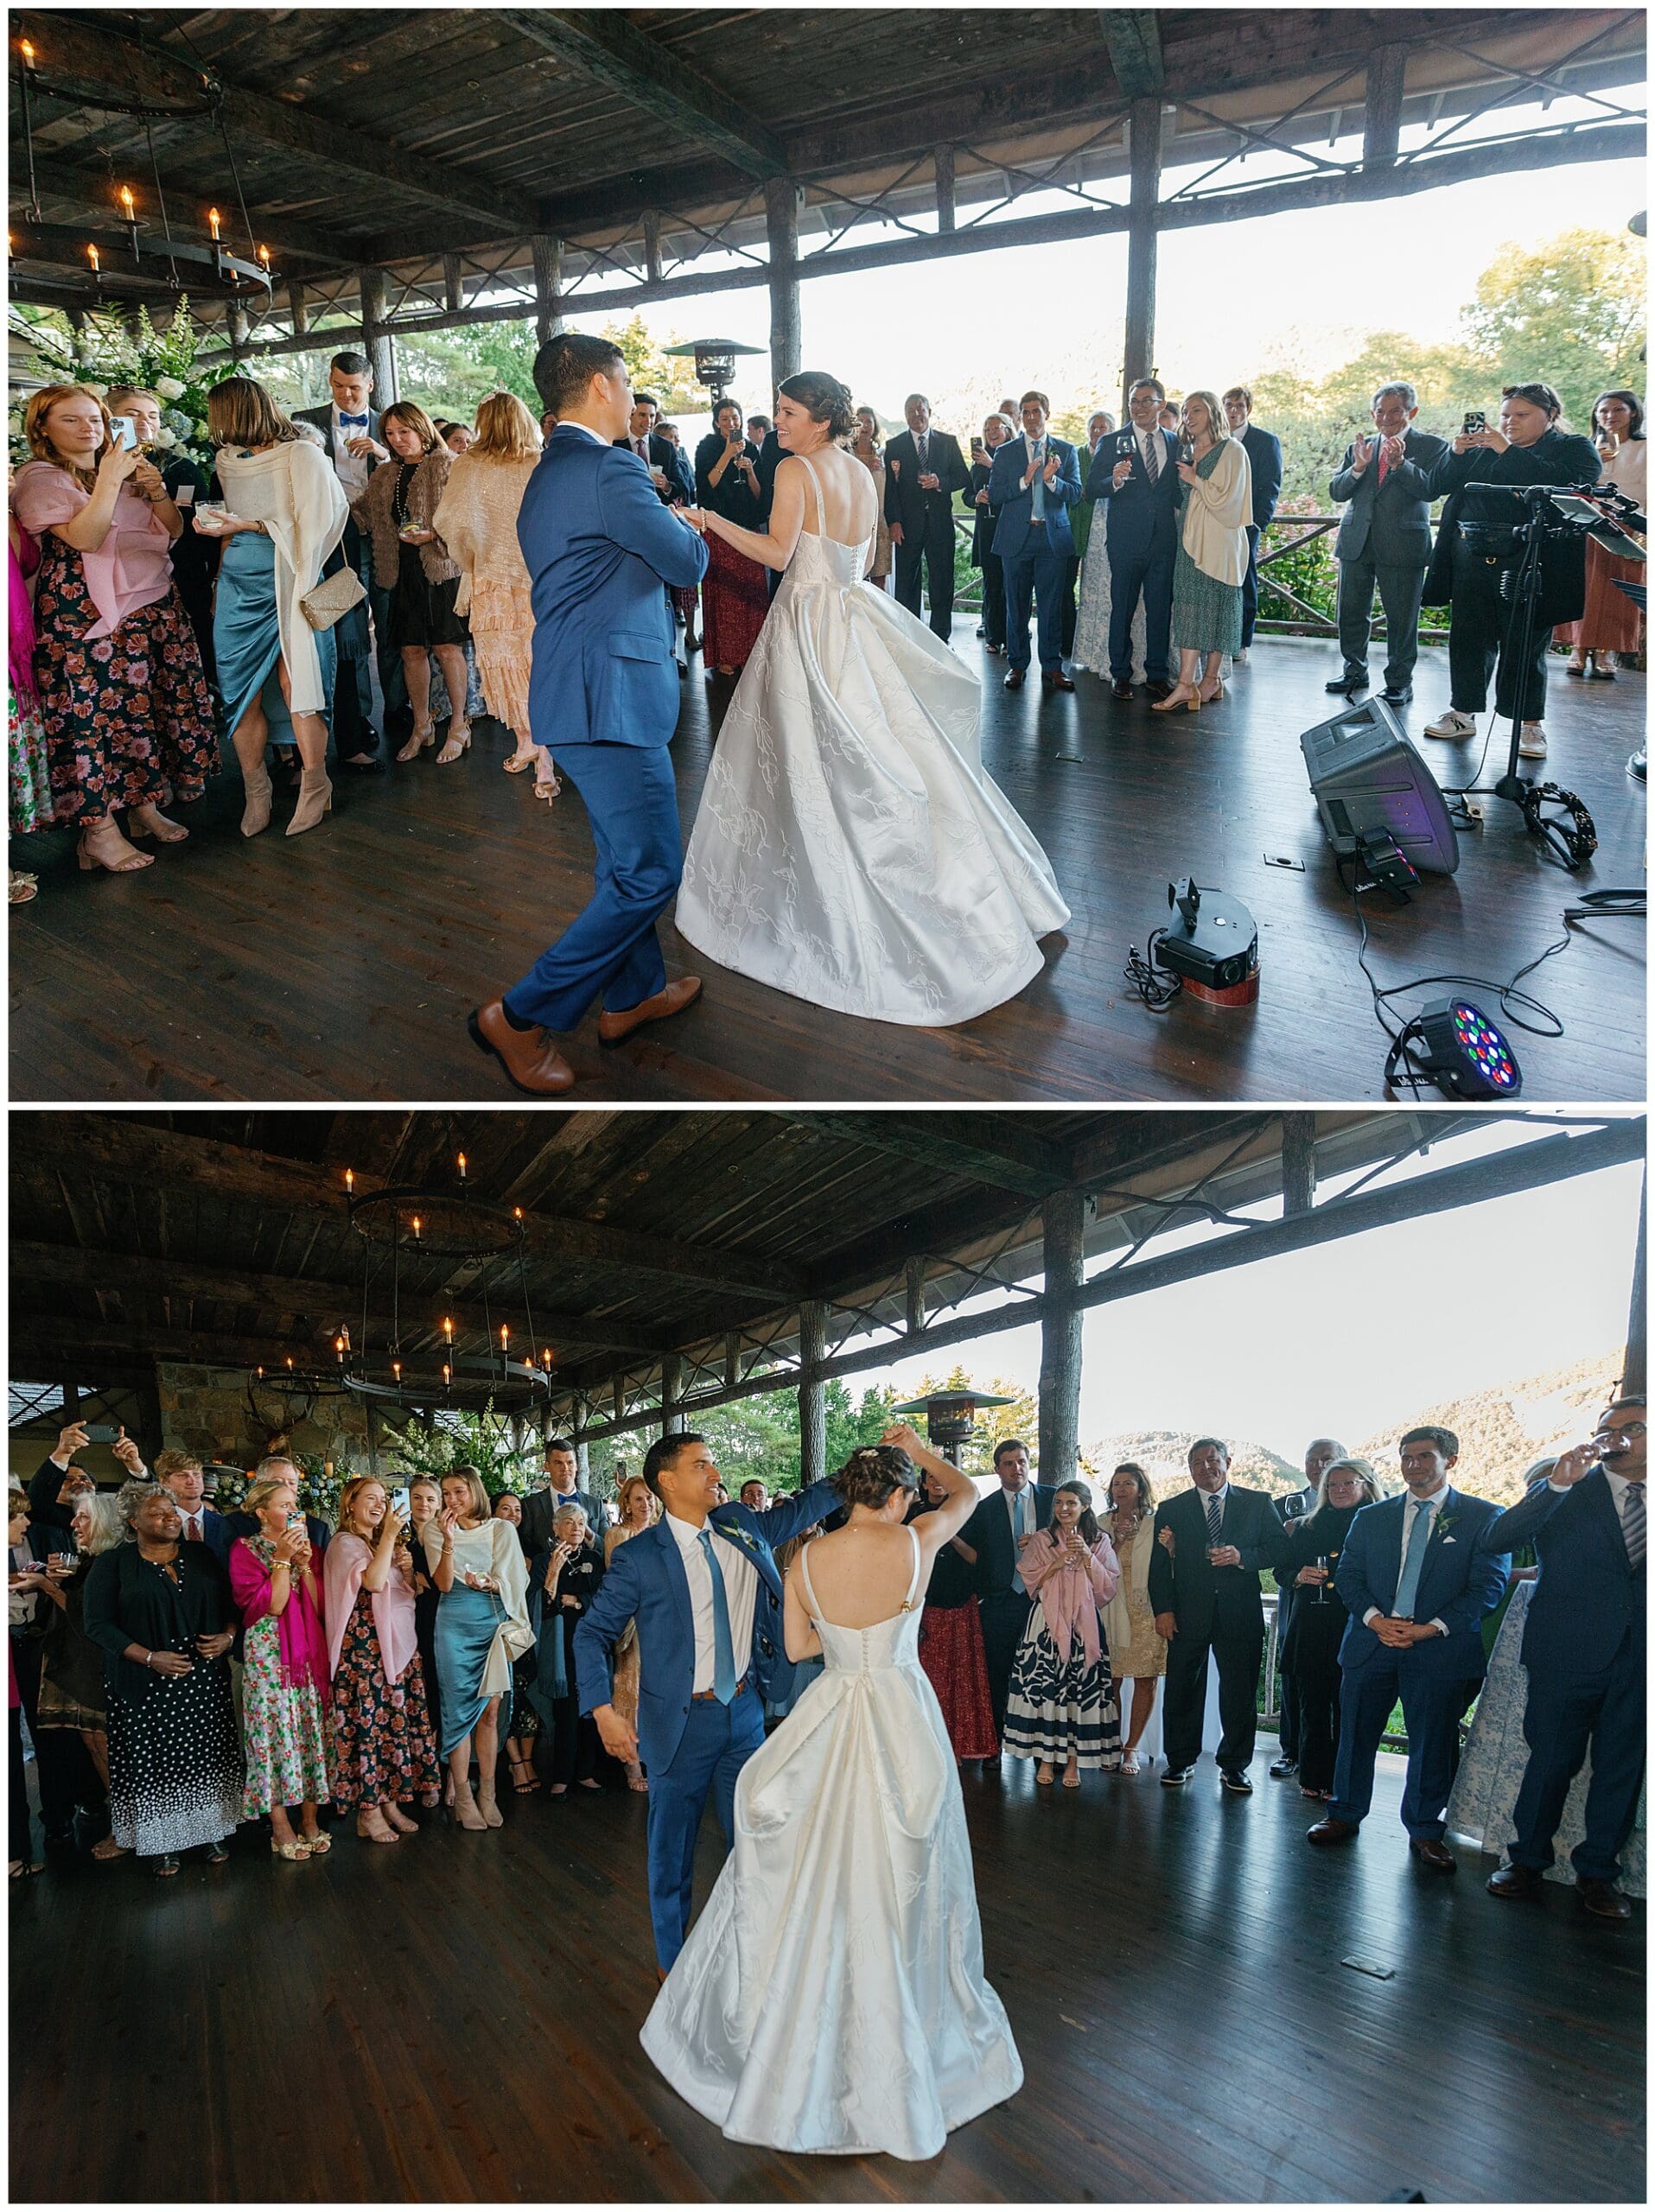 A bride and groom's first dance at a wedding.